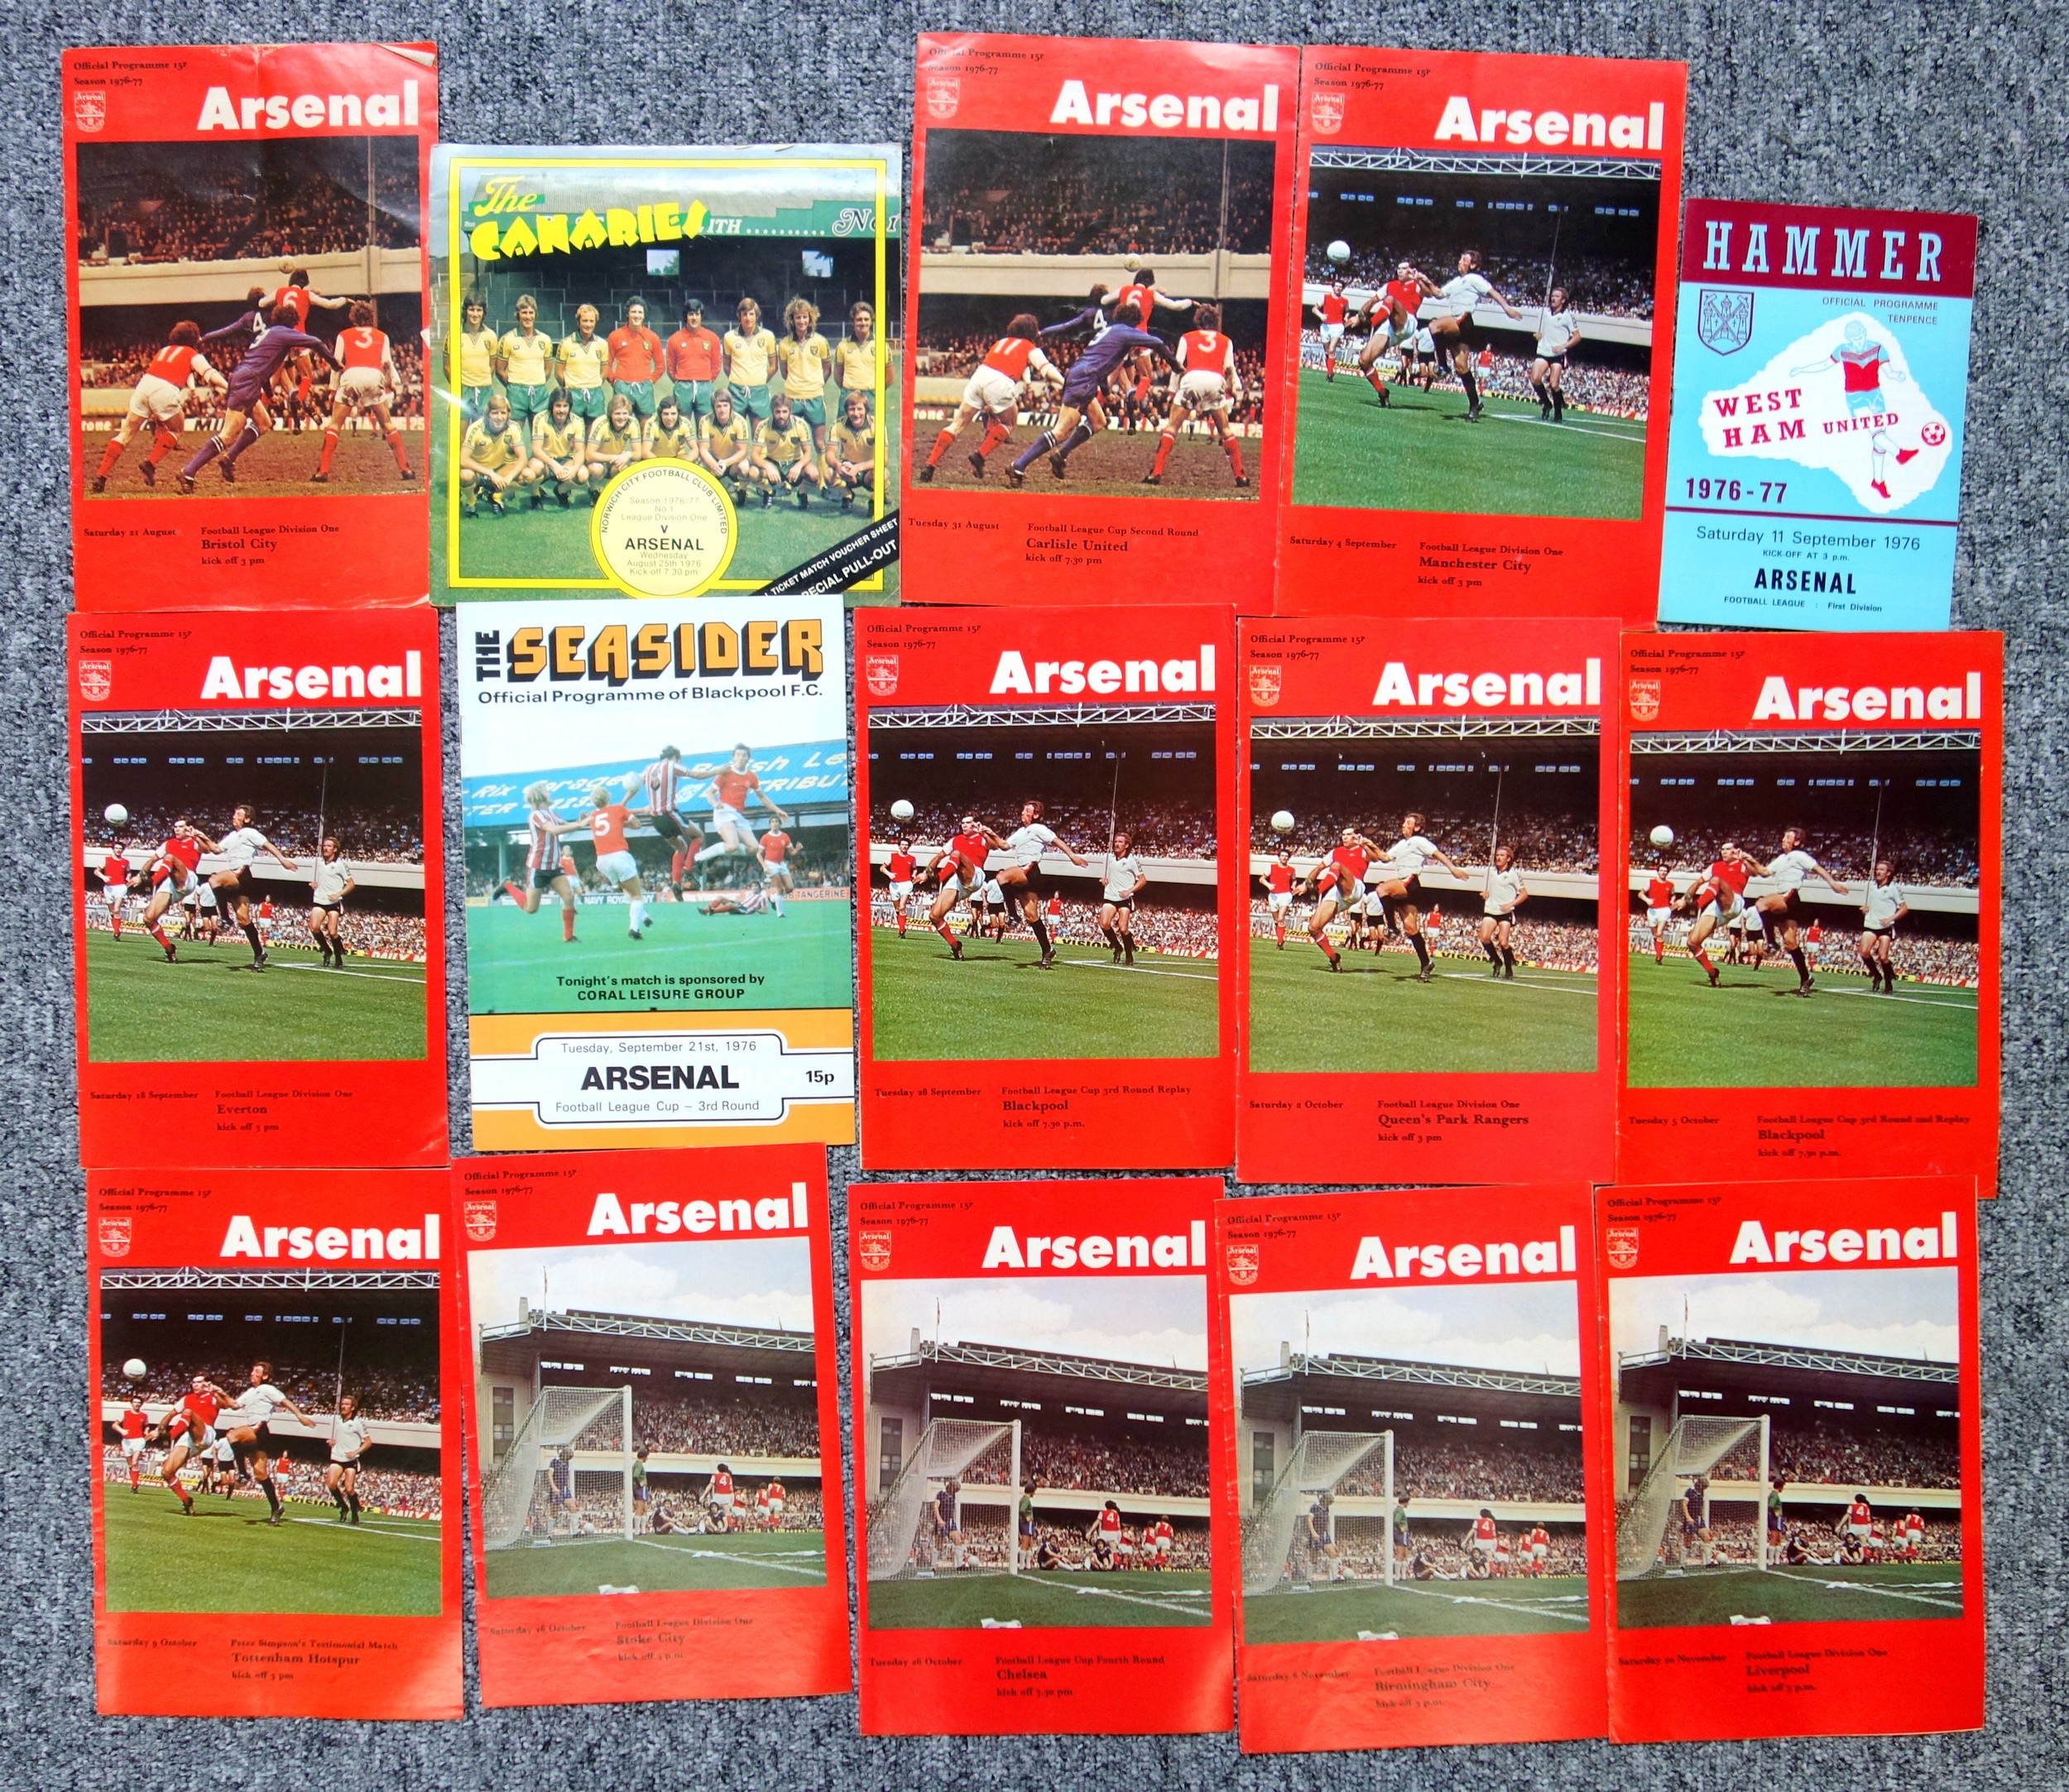 Arsenal Football Club Home and Away Programmes from the 1976-77 season. (39)